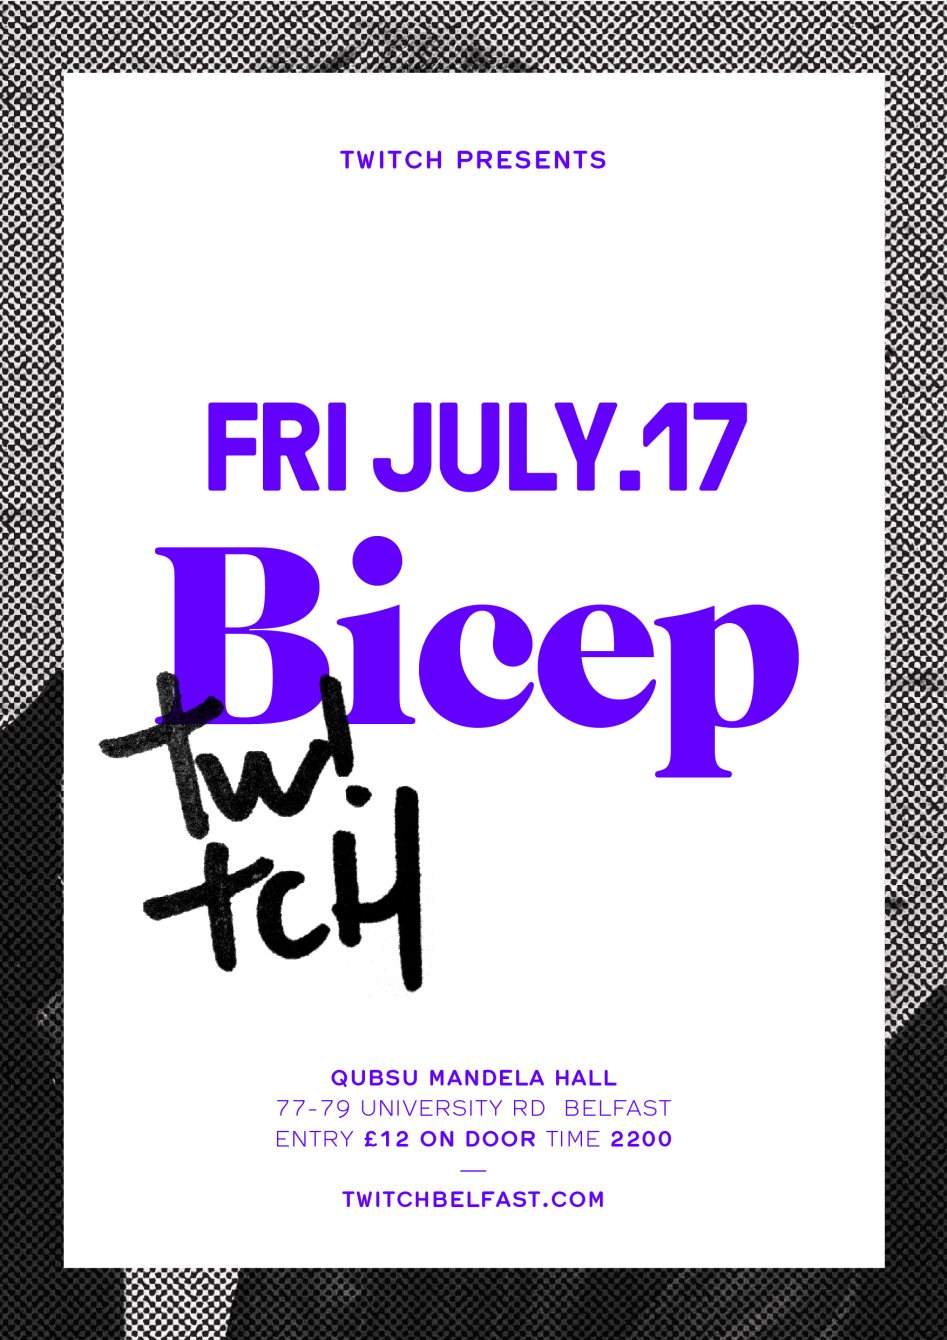 Tw!tch with Bicep & Tw!tch Residents (Plenty of Tickets on the Door) - Página frontal